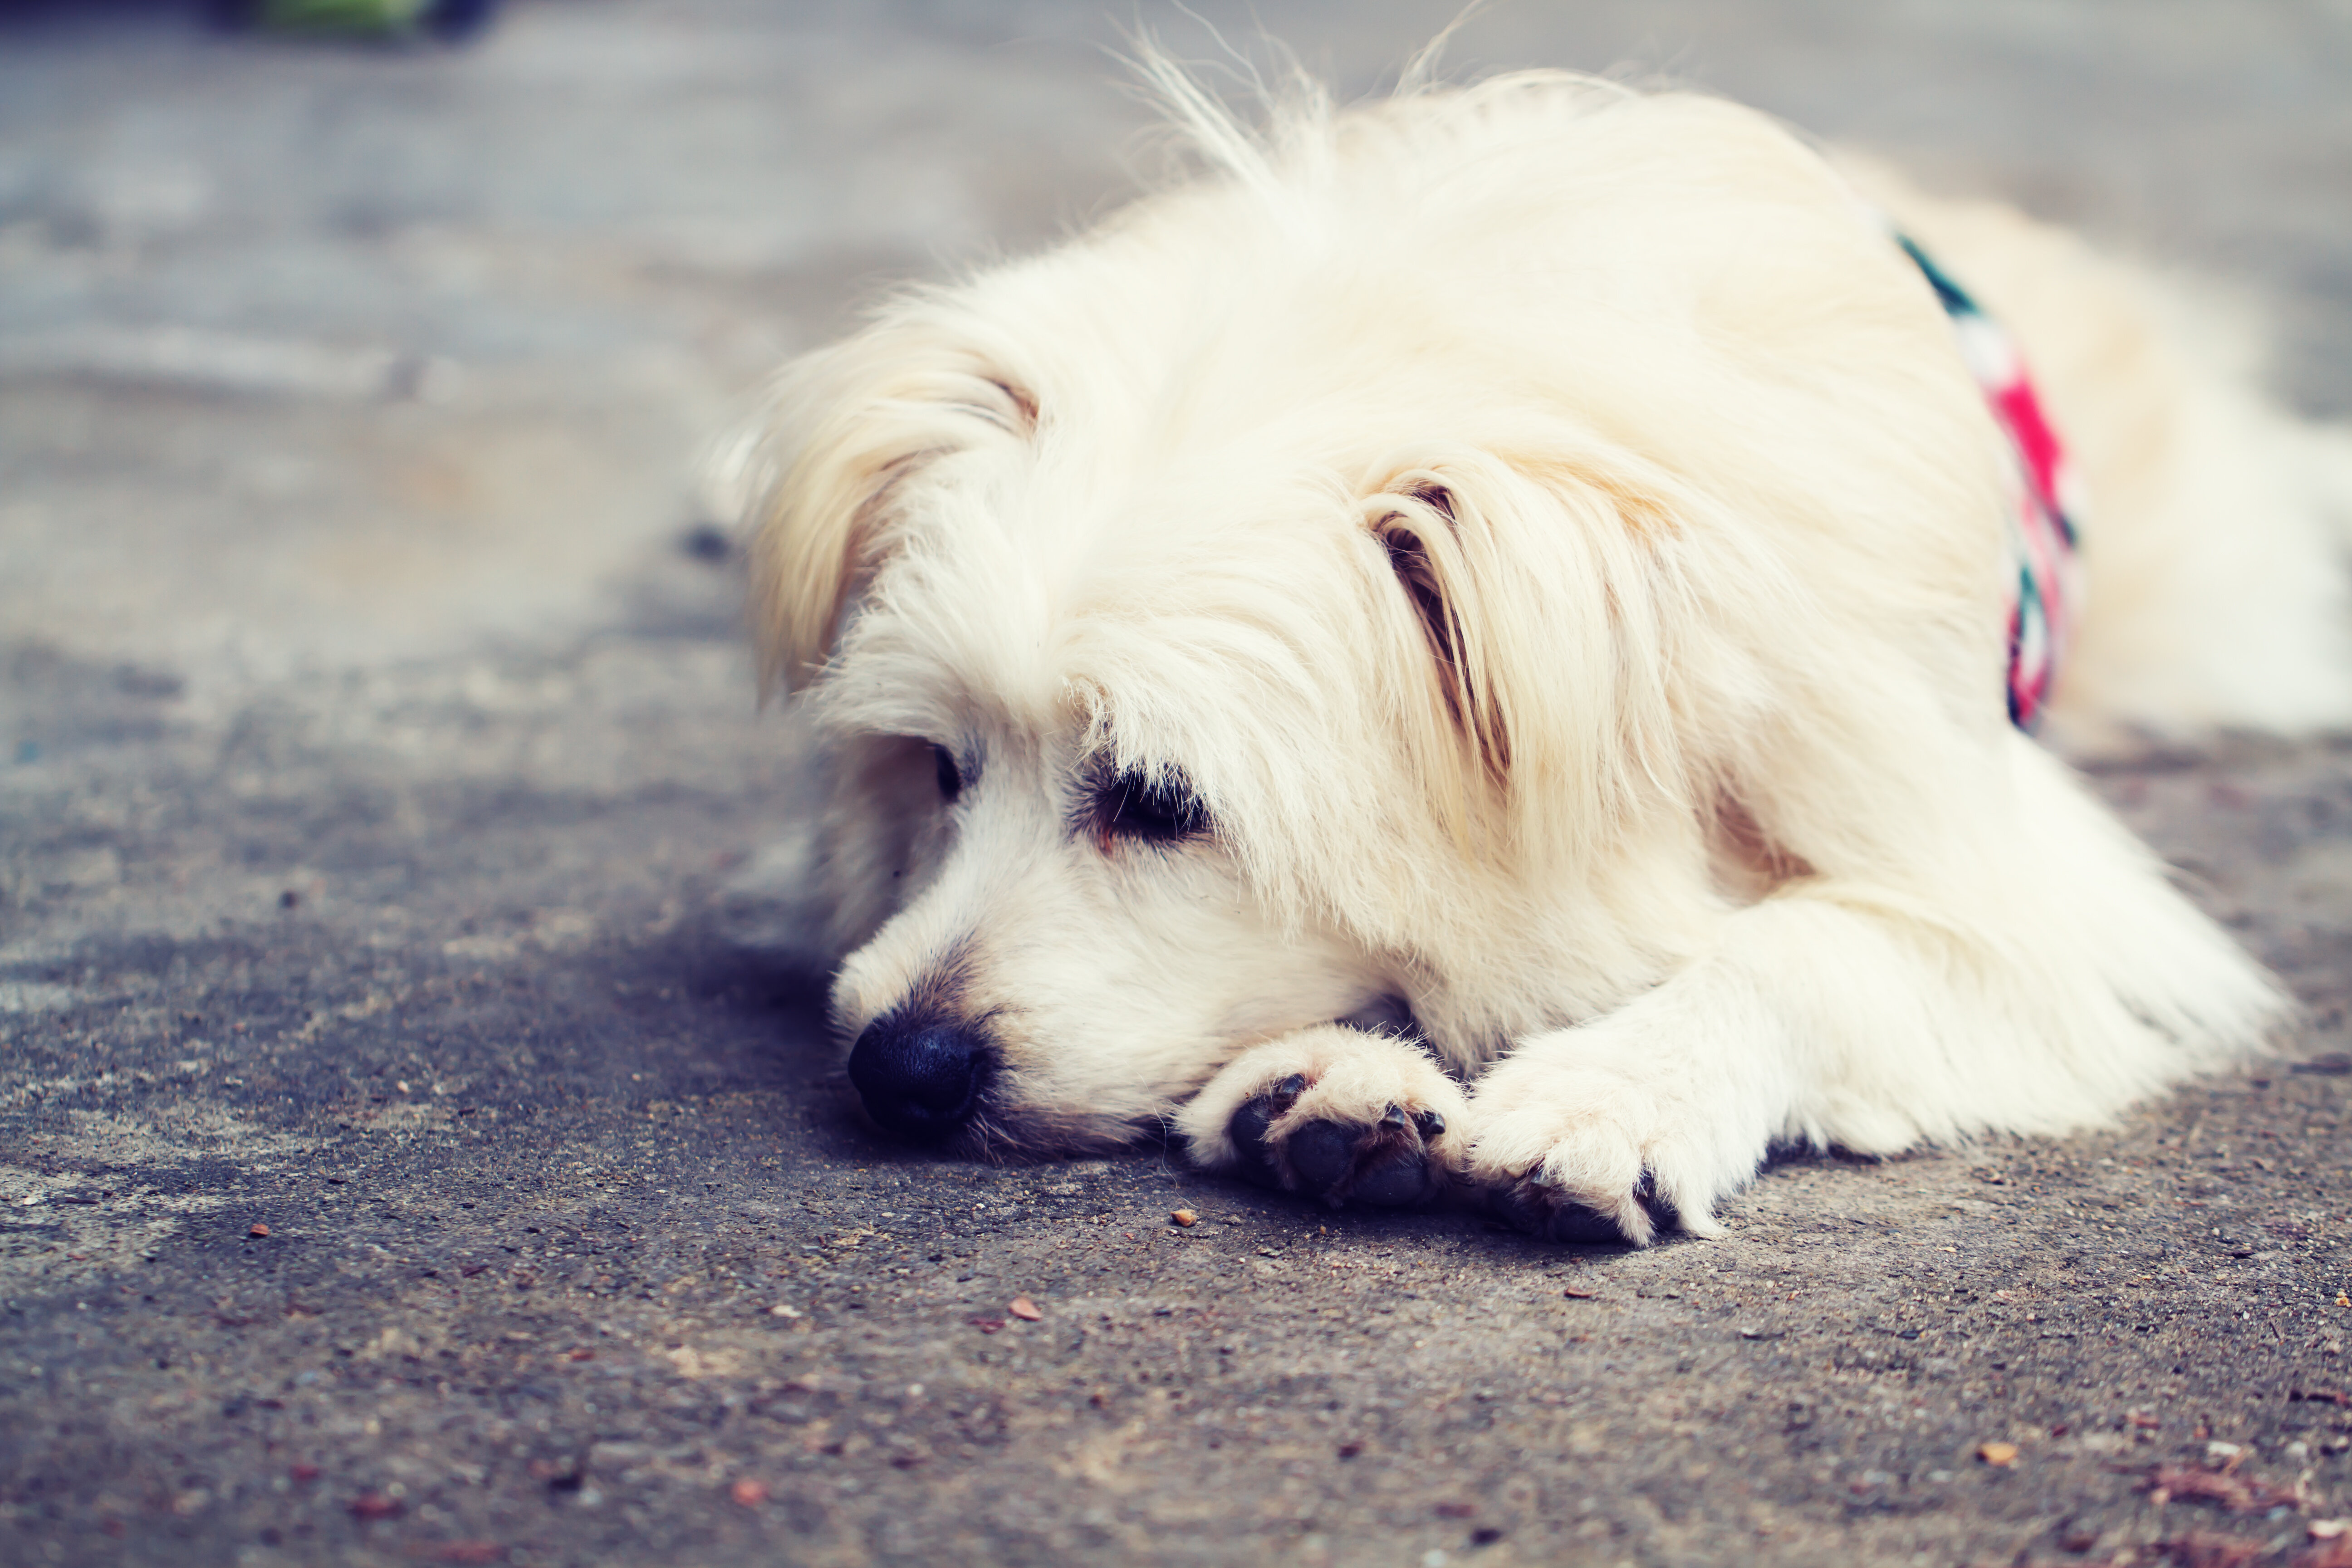 panic attack symptoms in dogs